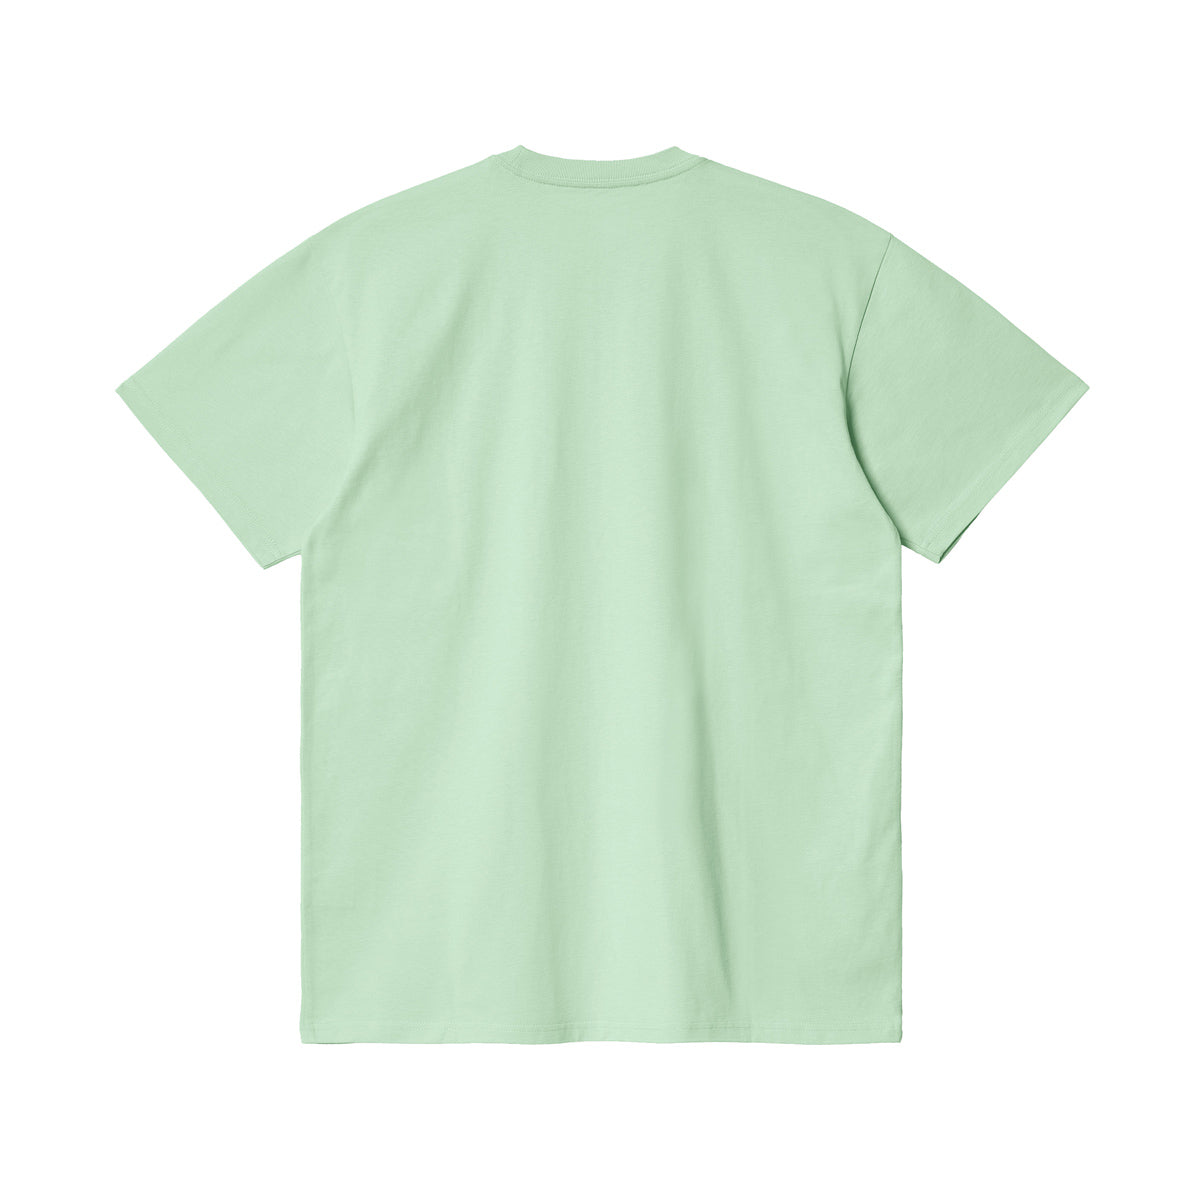 Carhartt WIP SS Chase T Shirt Pale Spearmint Gold